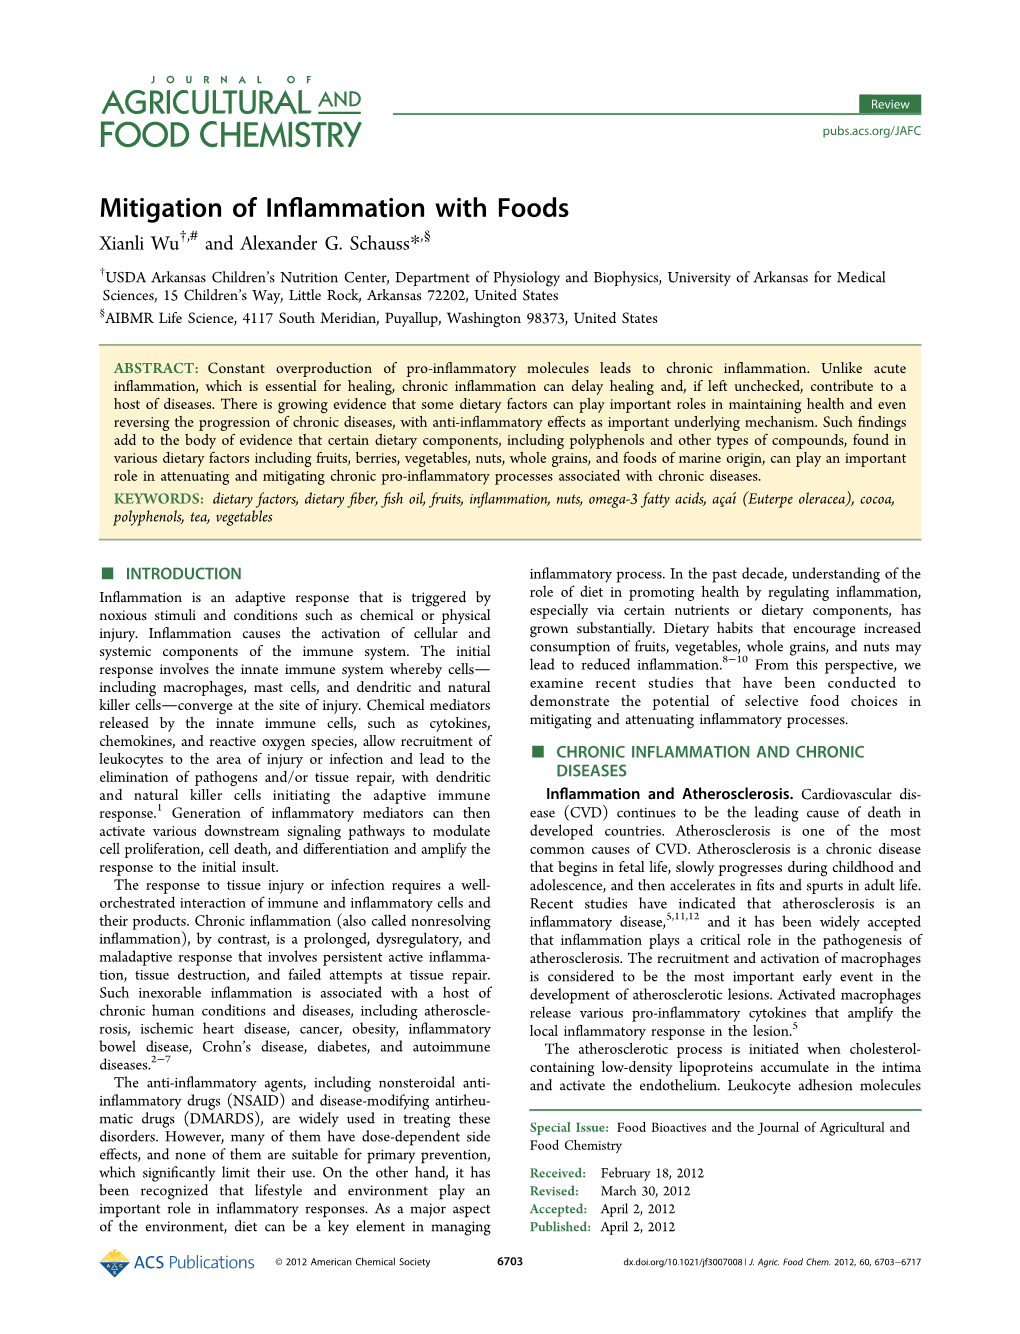 Mitigation of Inflammation with Foods